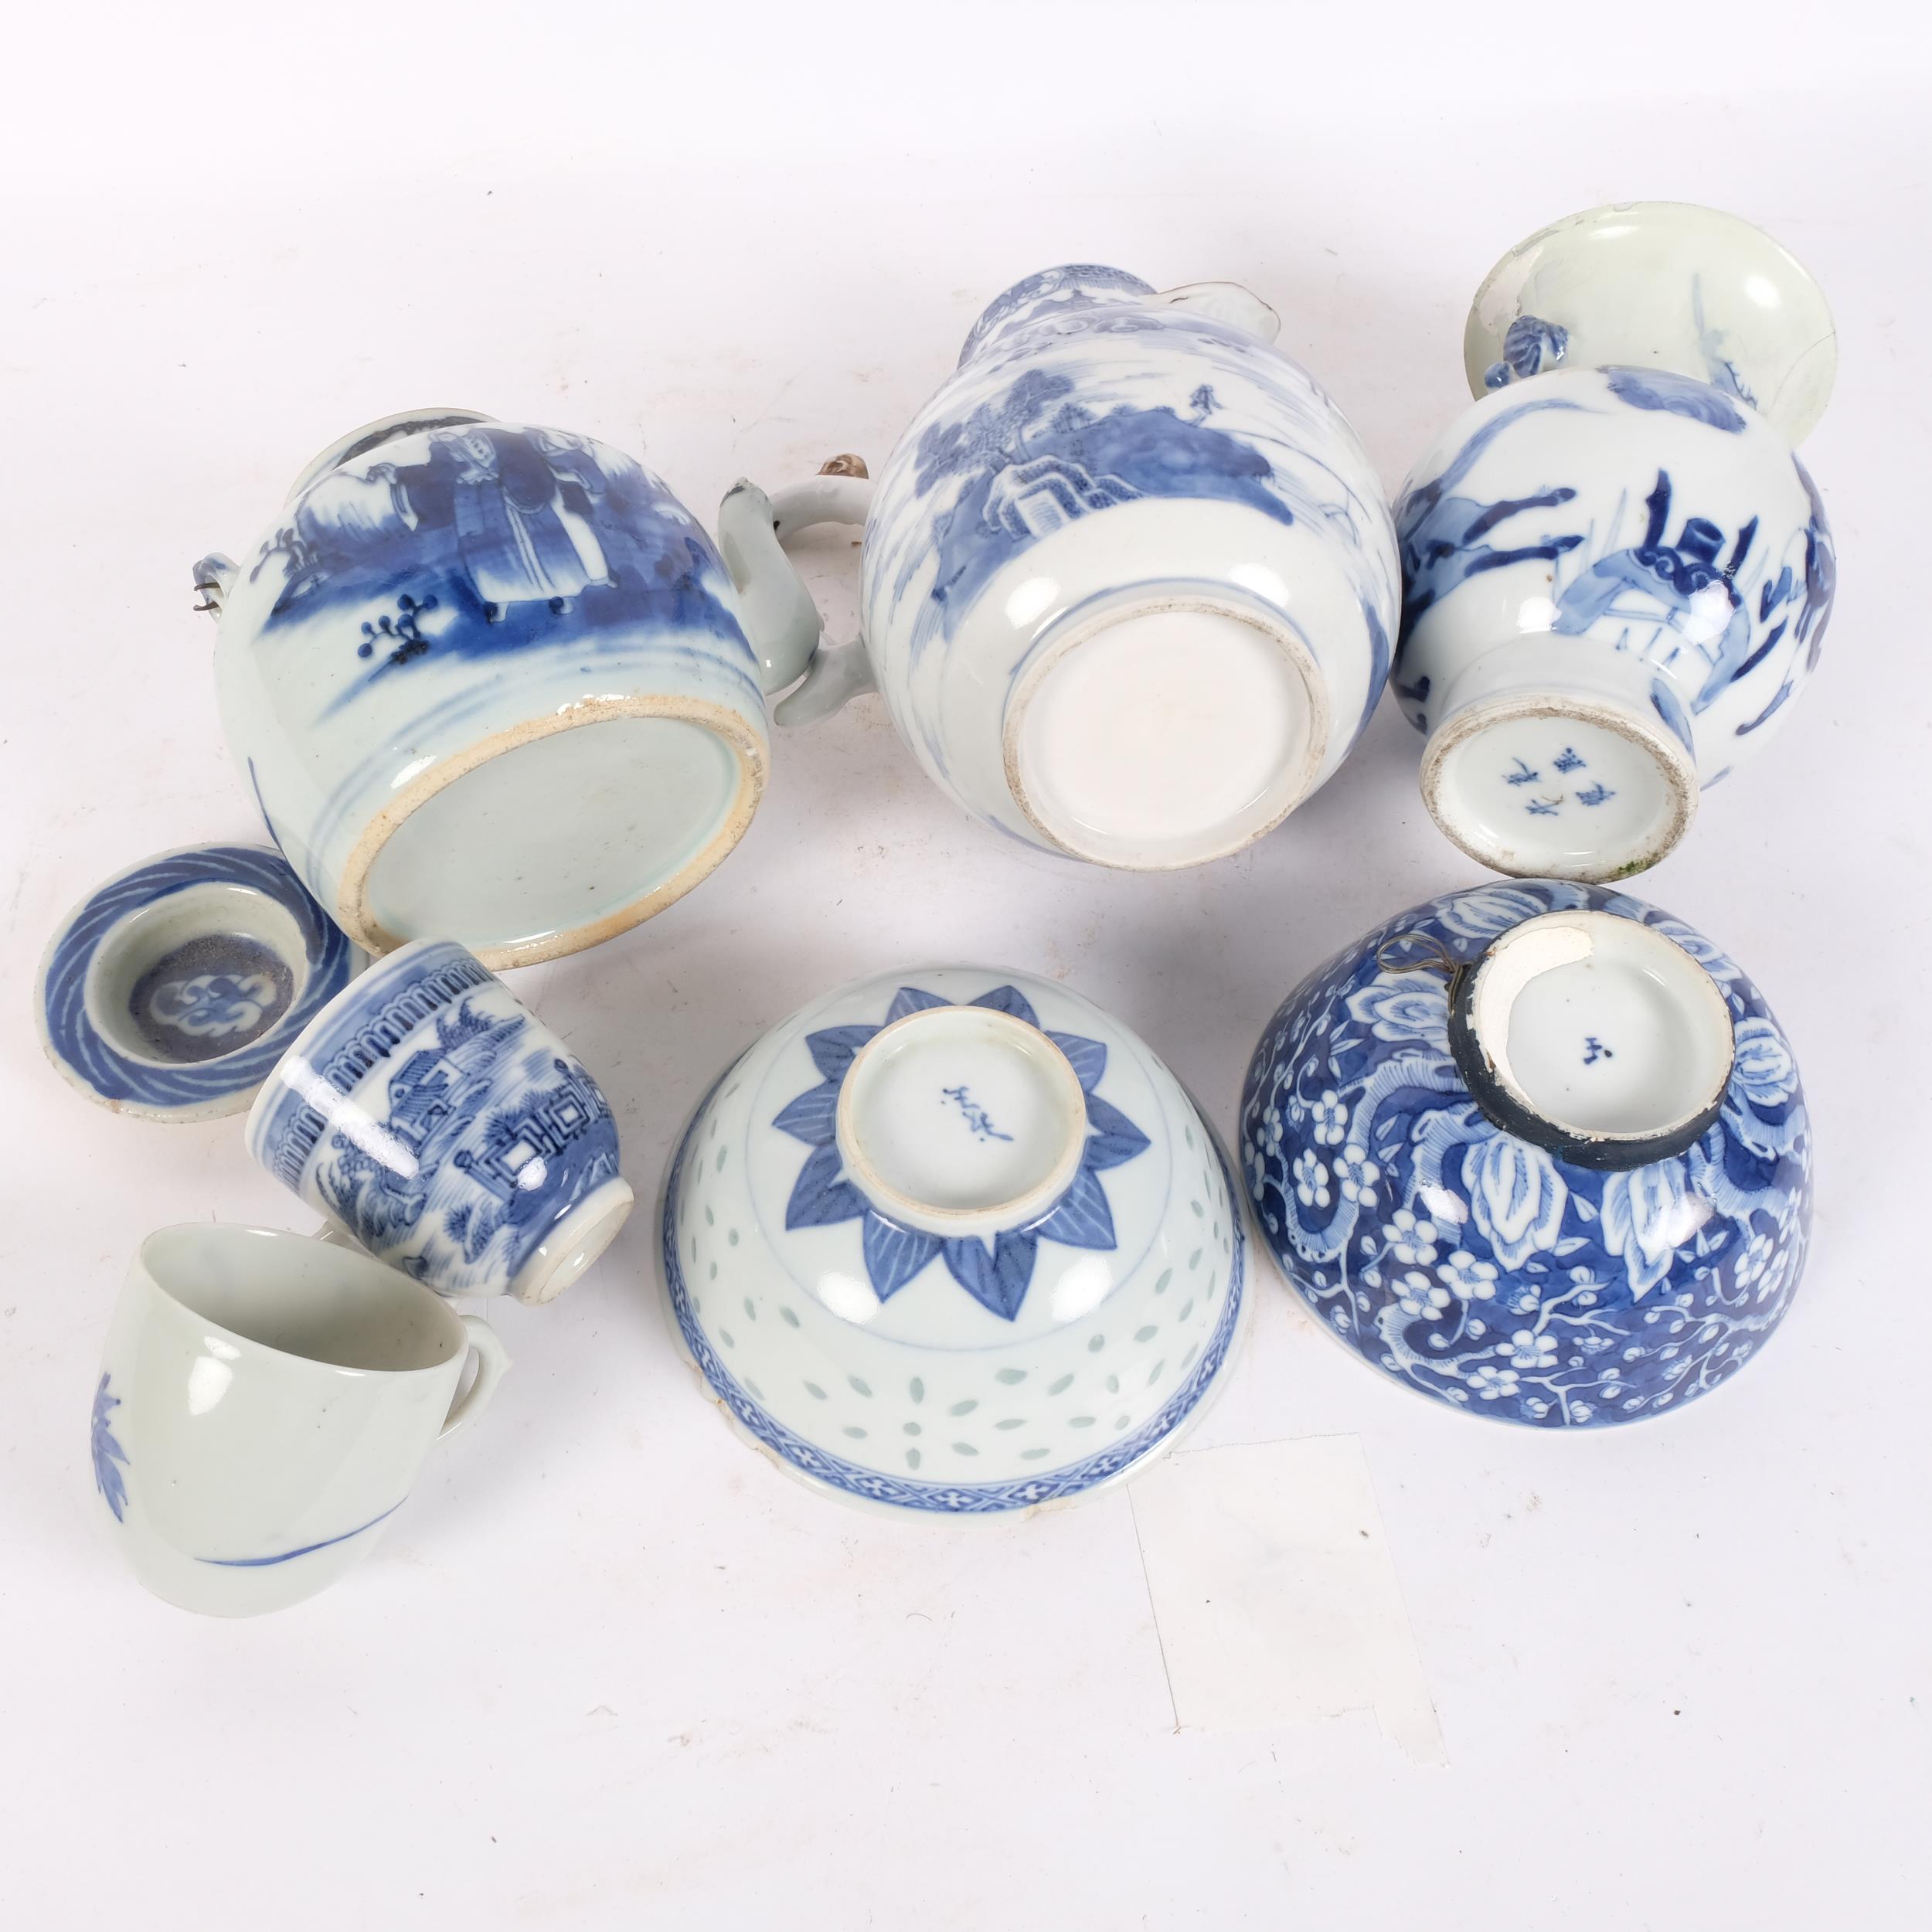 A group of Antique Chinese blue and white items, including a vase, teapot, coffee pot, 2 bowls, - Image 2 of 2